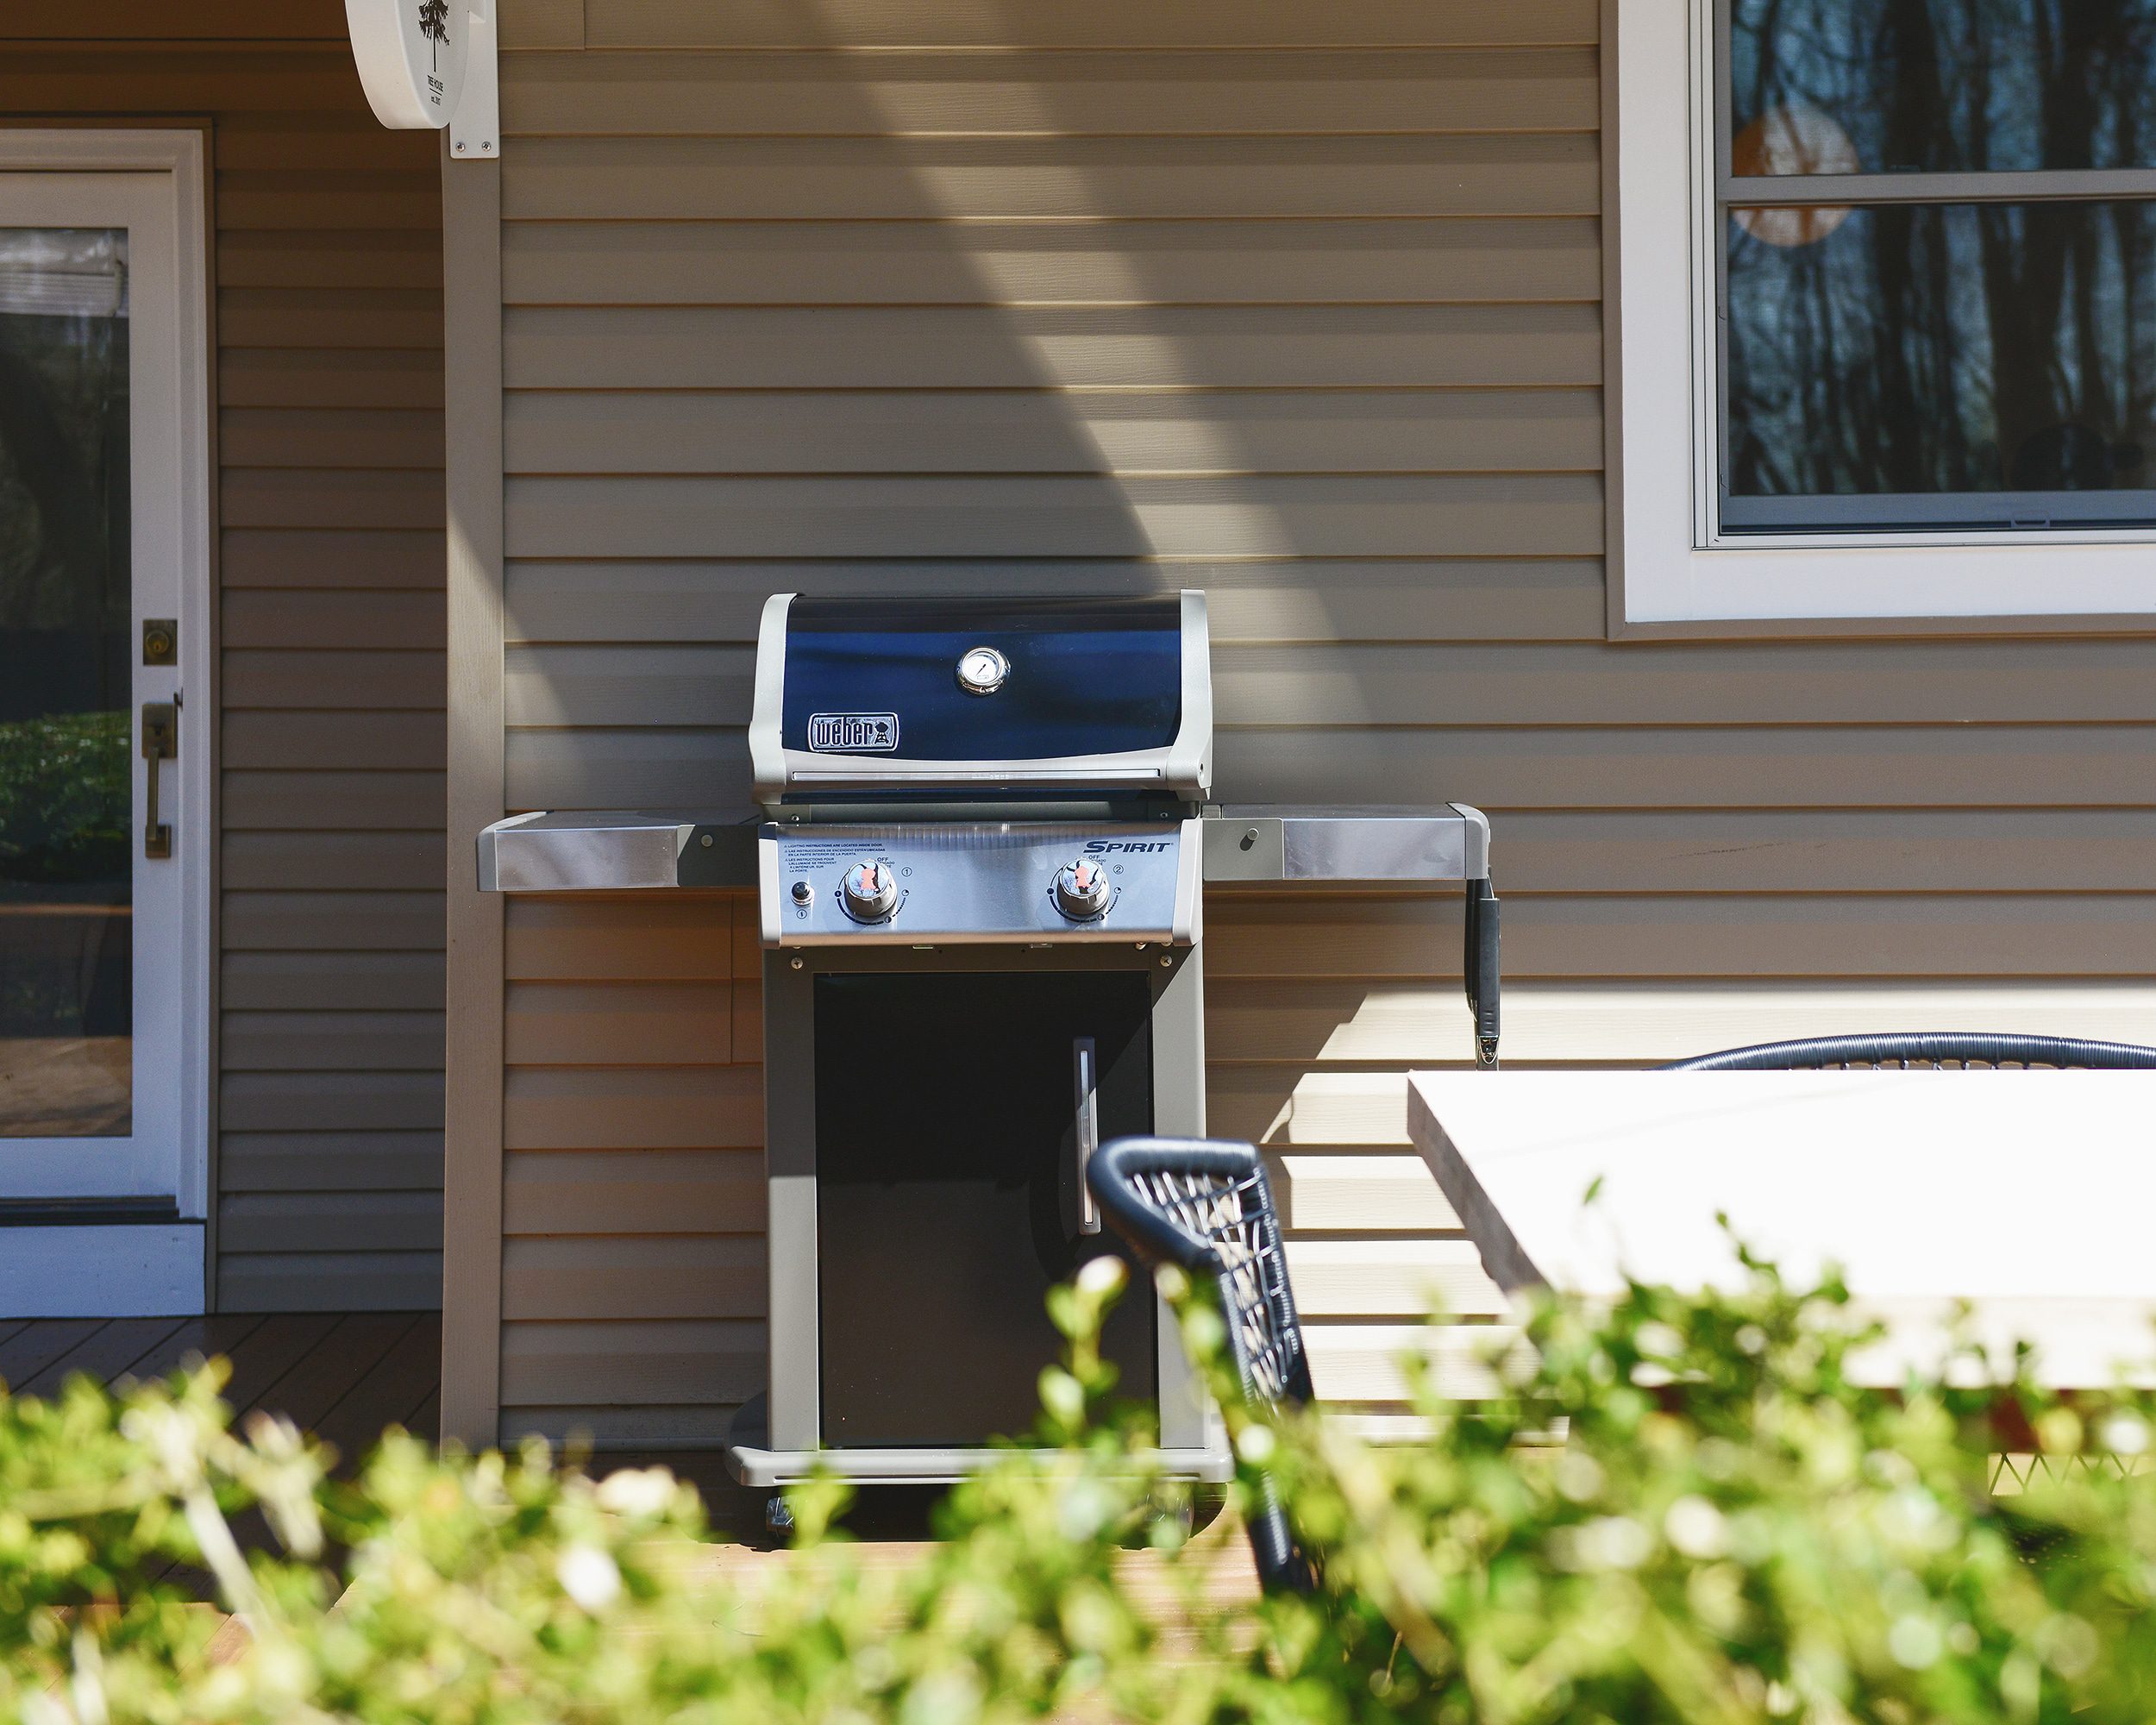 A new weber gas grill sits on a freshly stained deck at the front of a tan house // via Yellow Brick Home